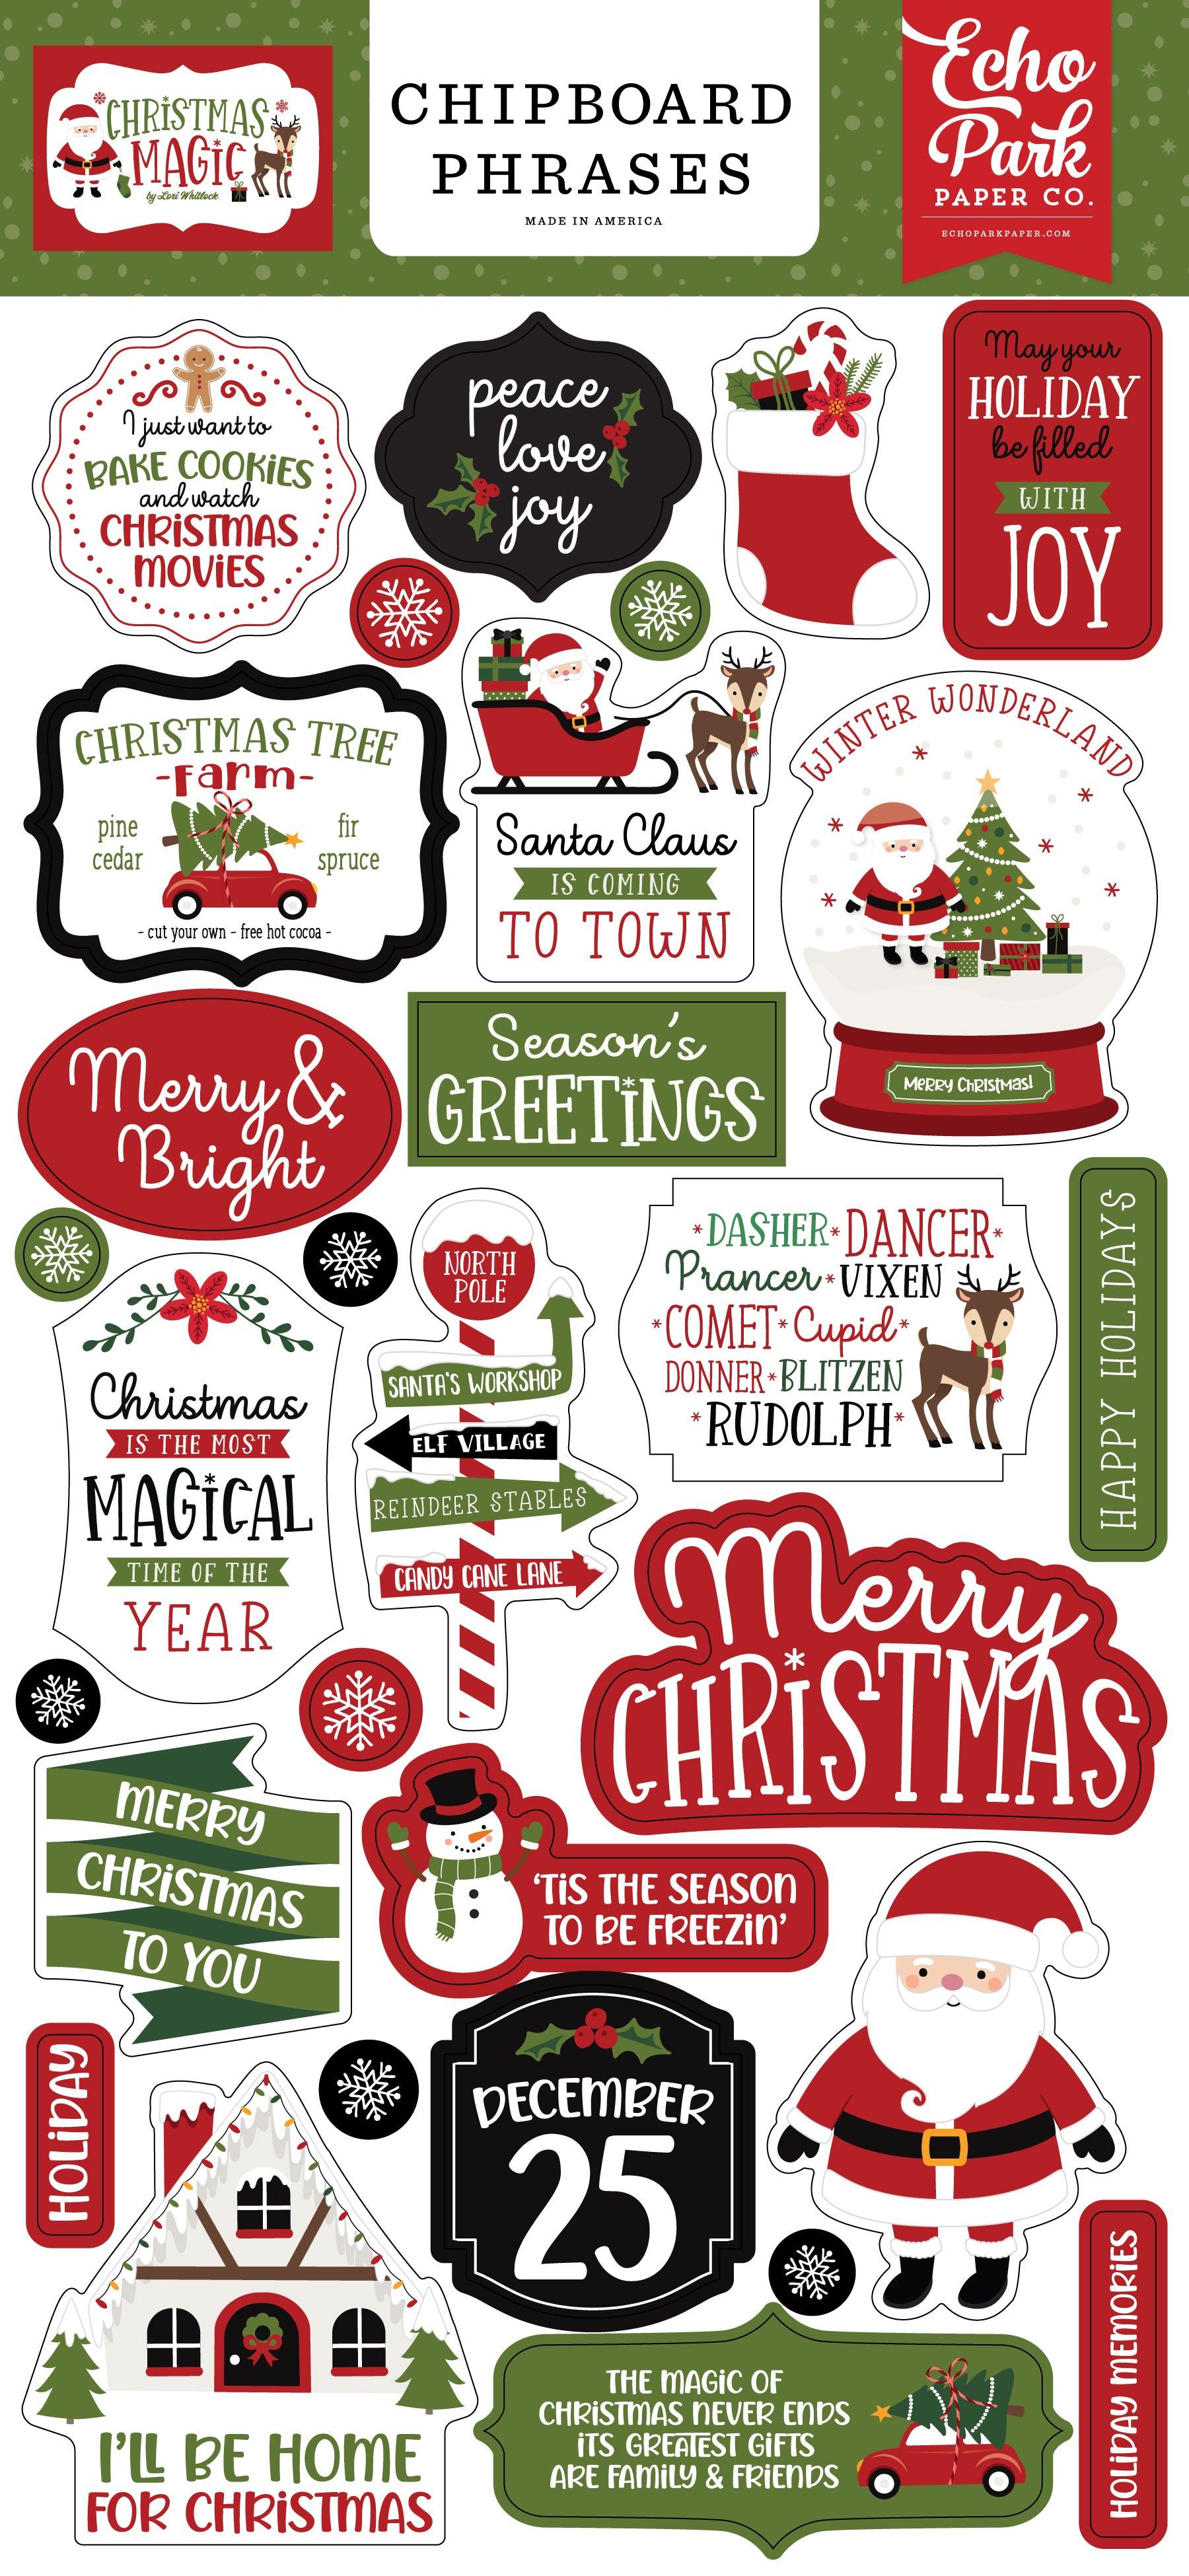 Christmas Magic Collection 6 x 12 Scrapbook Chipboard Phrases by Echo Park Paper - Scrapbook Supply Companies